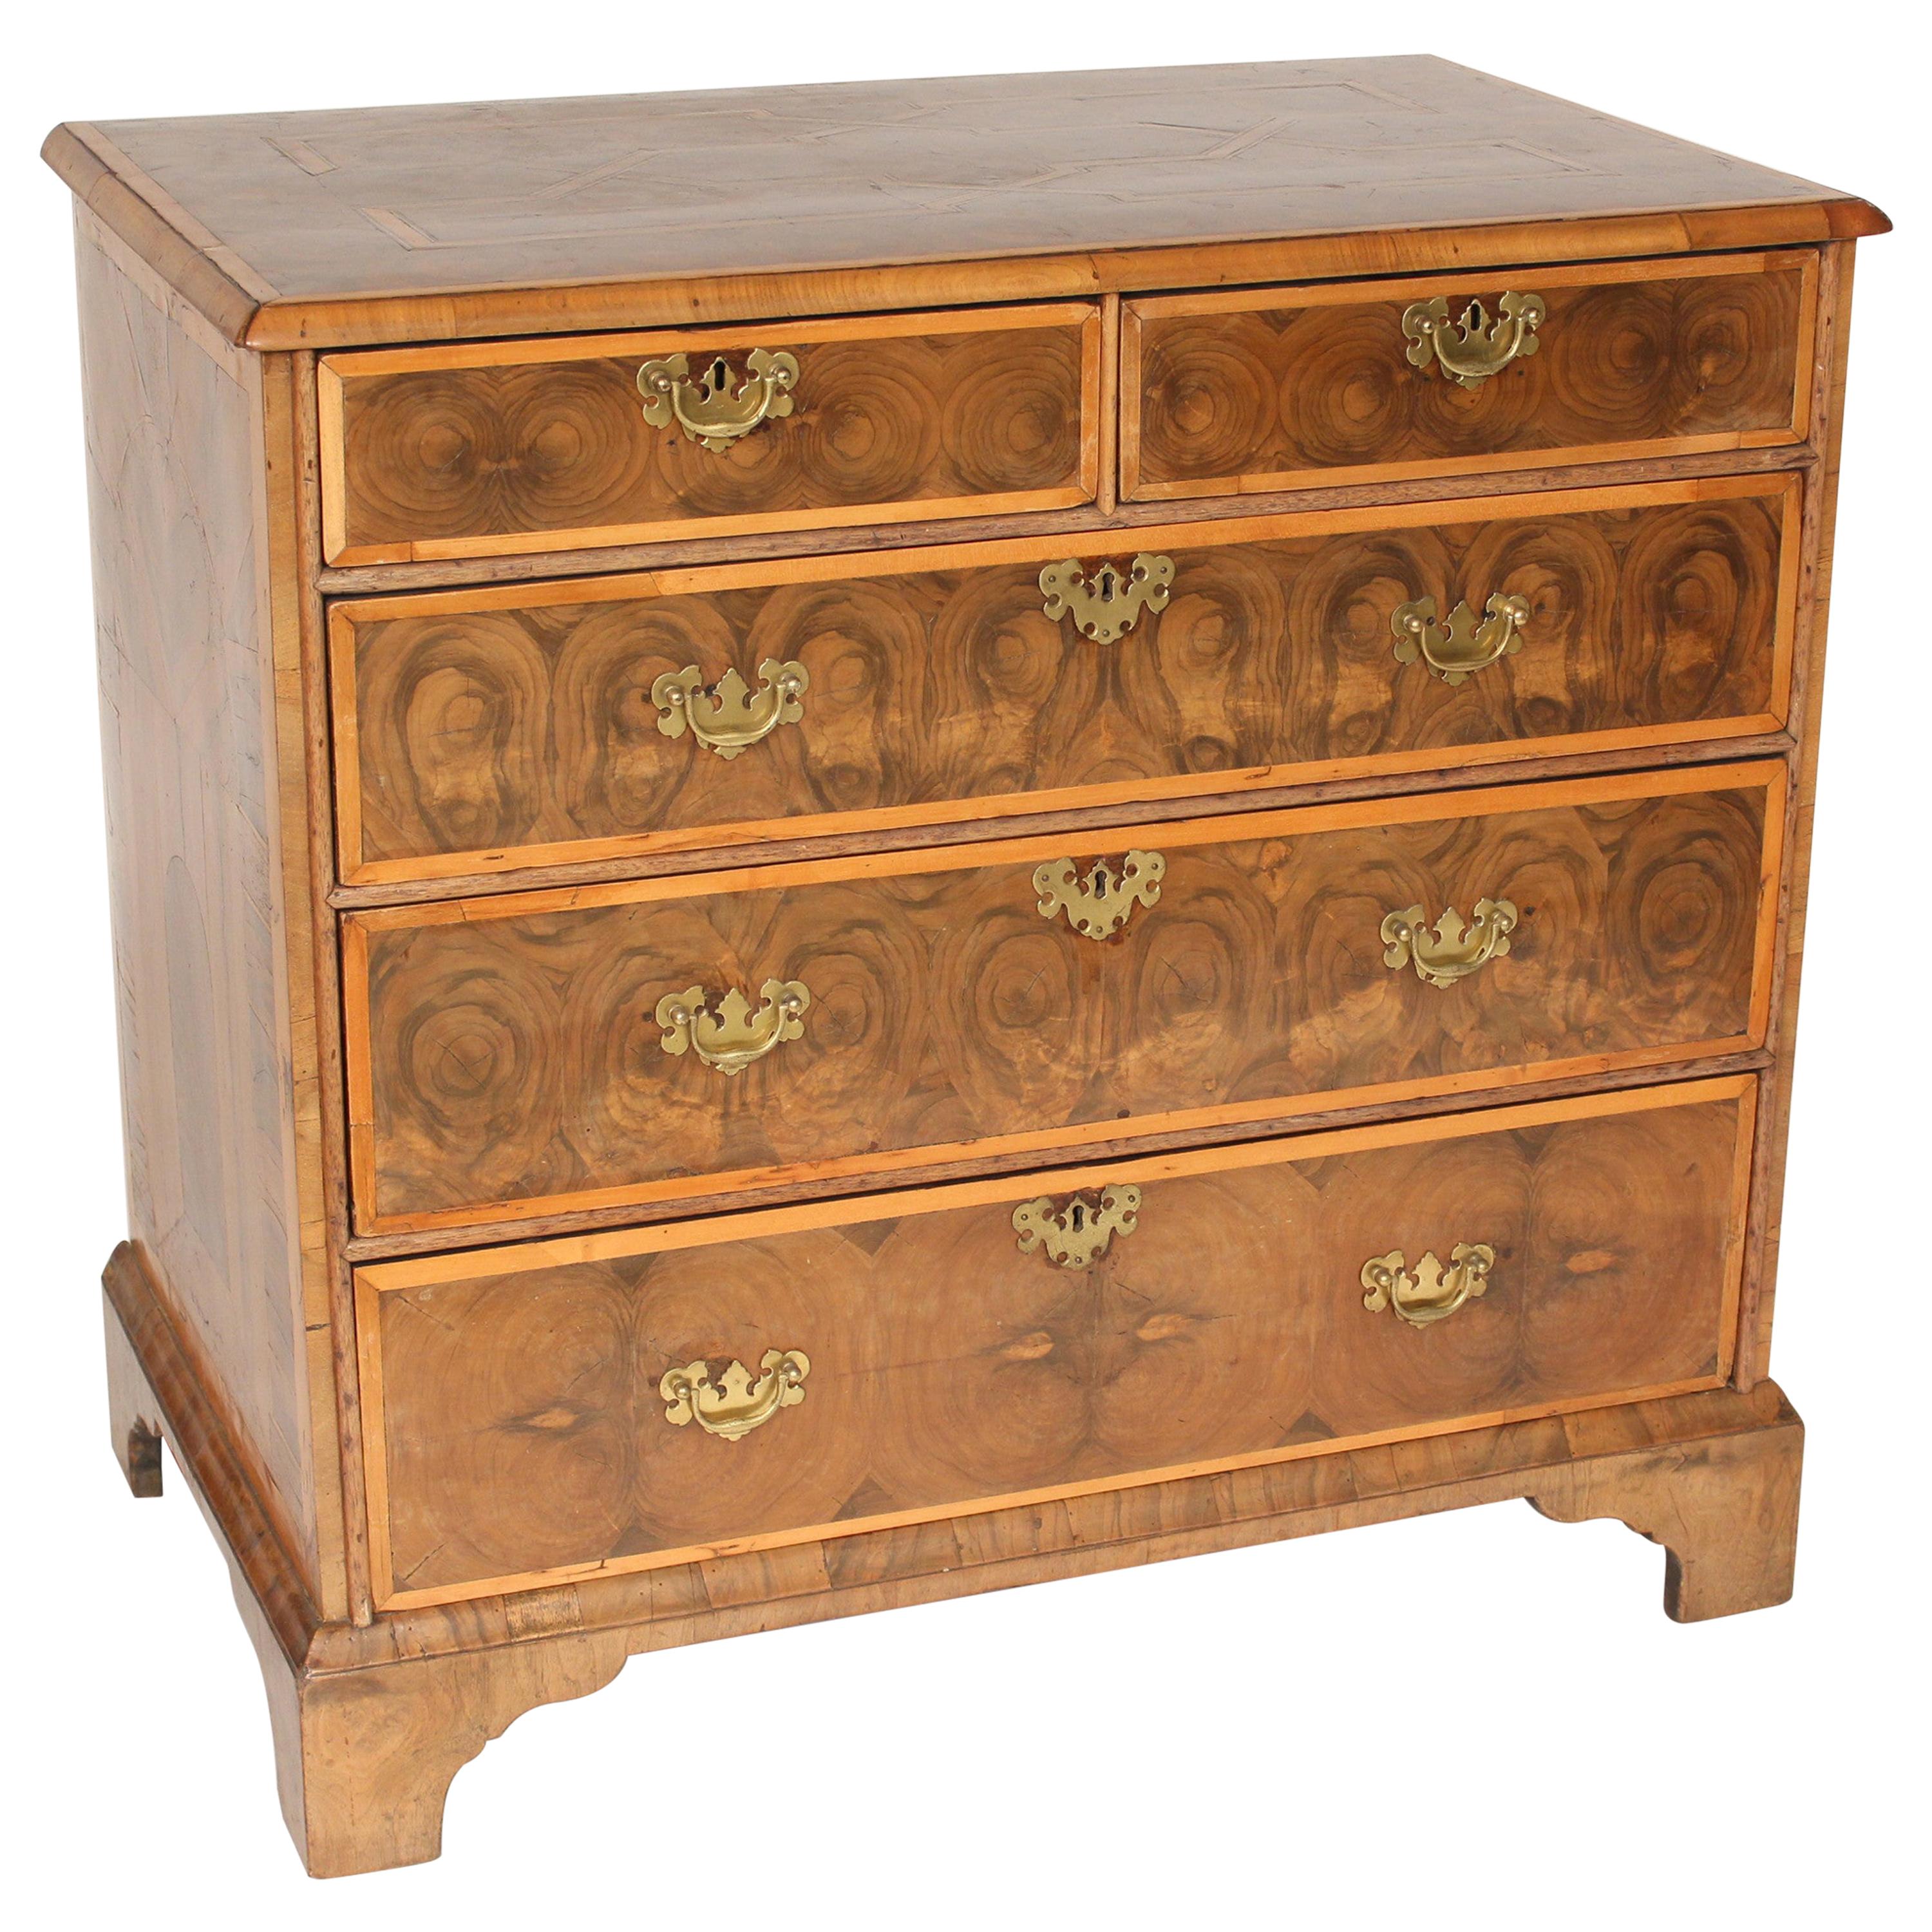 Georgian Oyster Burl Chest of Drawers For Sale